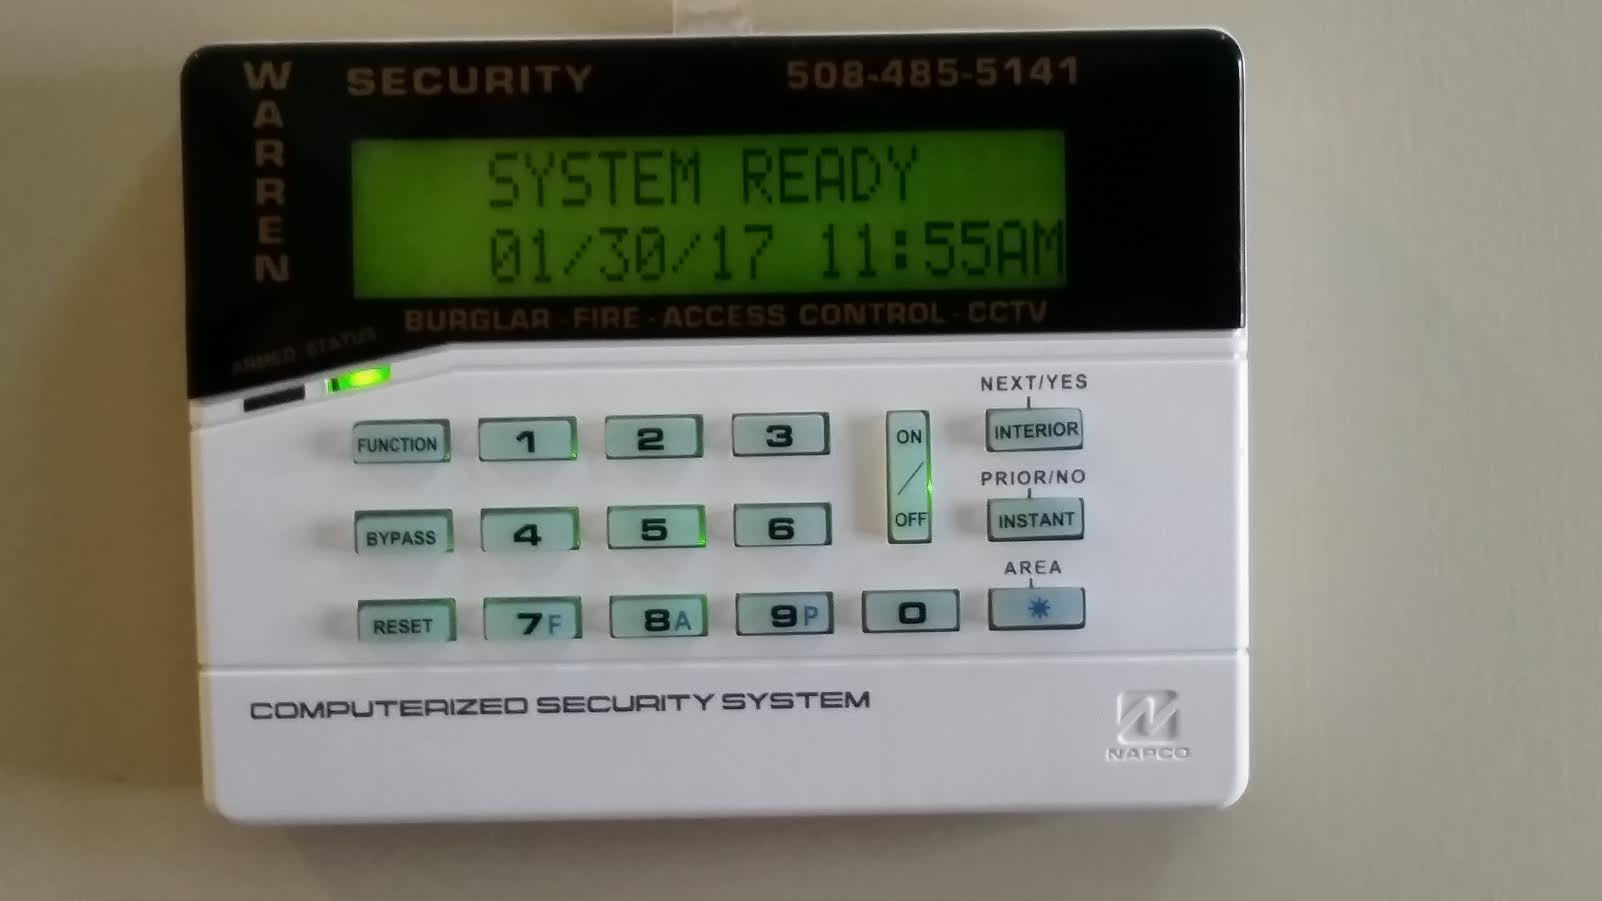 Computerized Security System - Security Alarms in malborough, MA